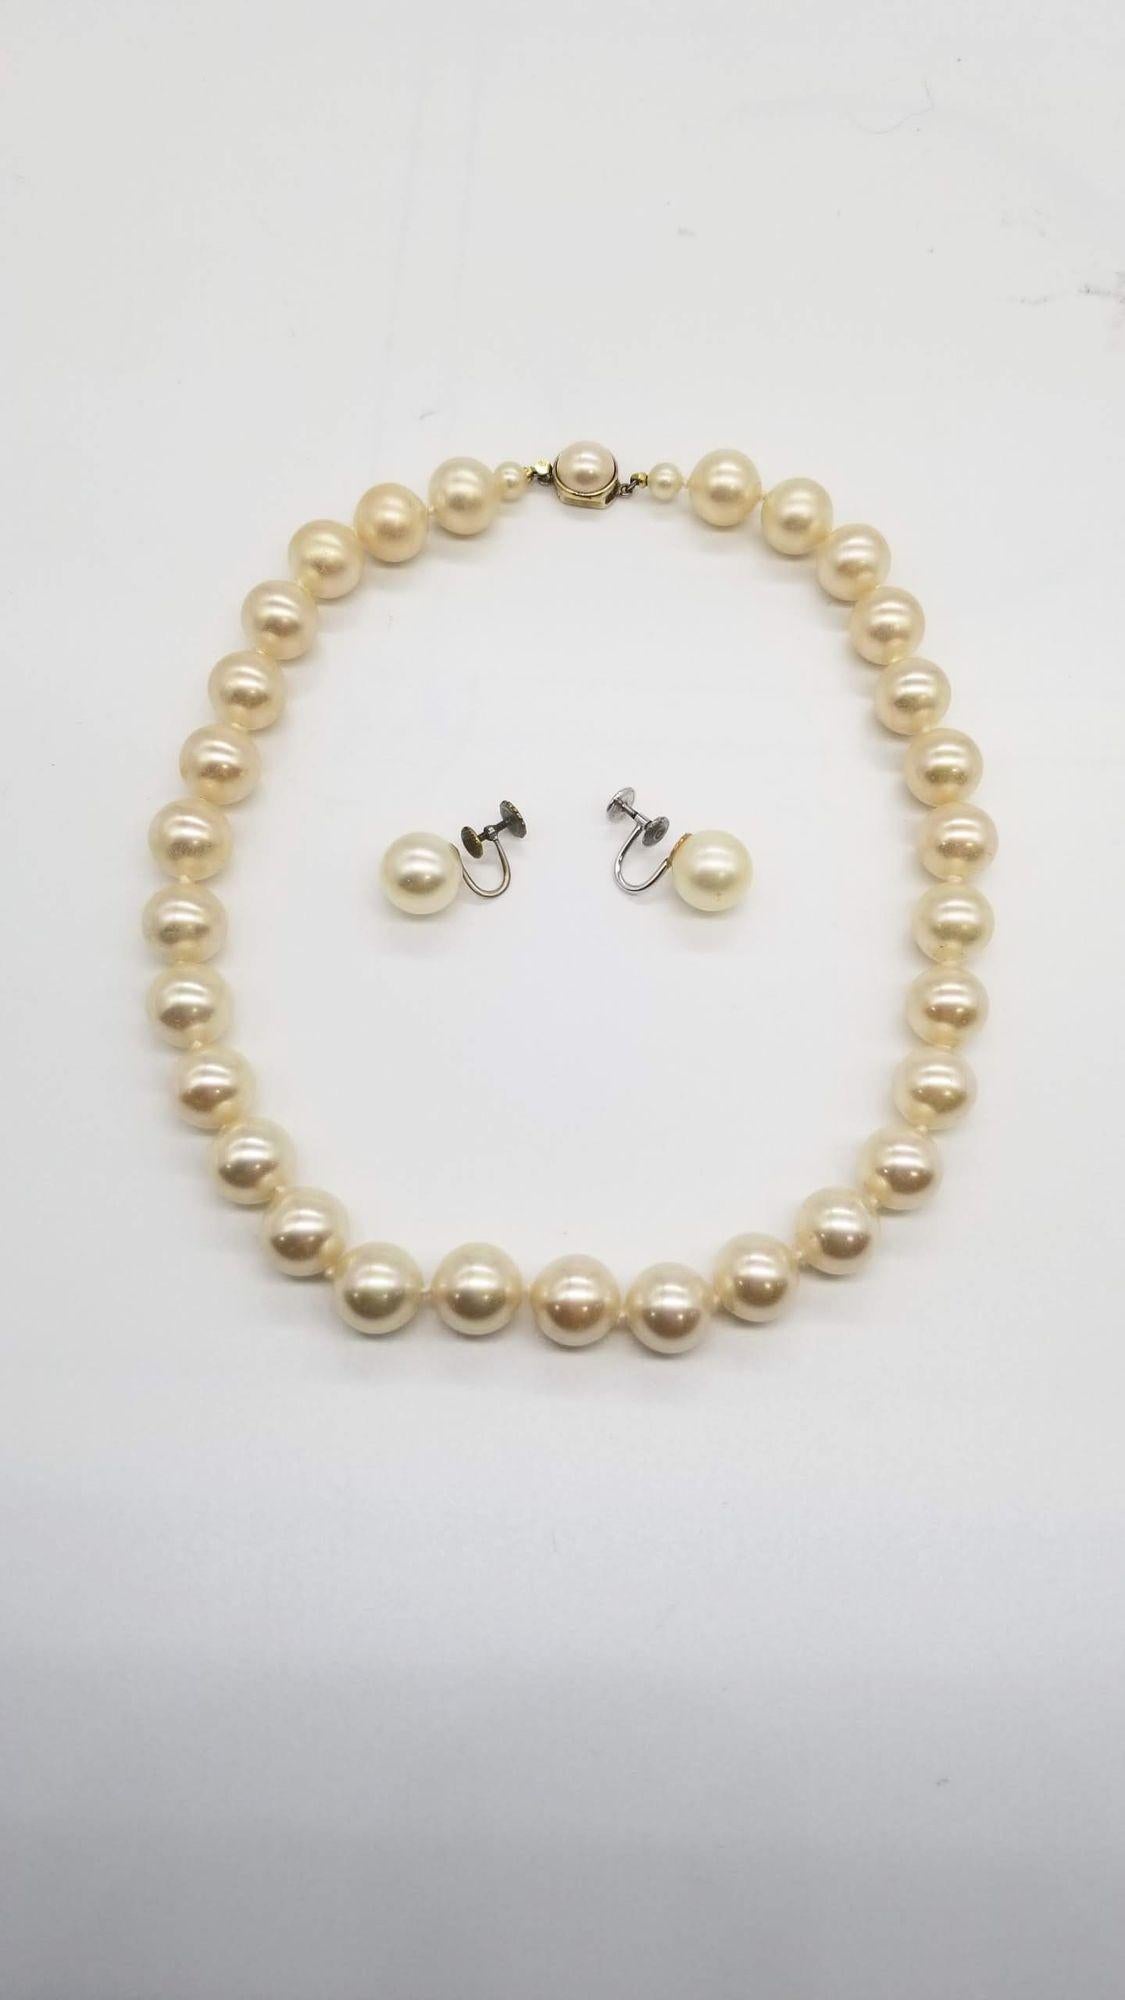 Marvella Sterling Pearl Necklace and Earrings Set: Timeless Elegance in 925 Silver

Marked: 